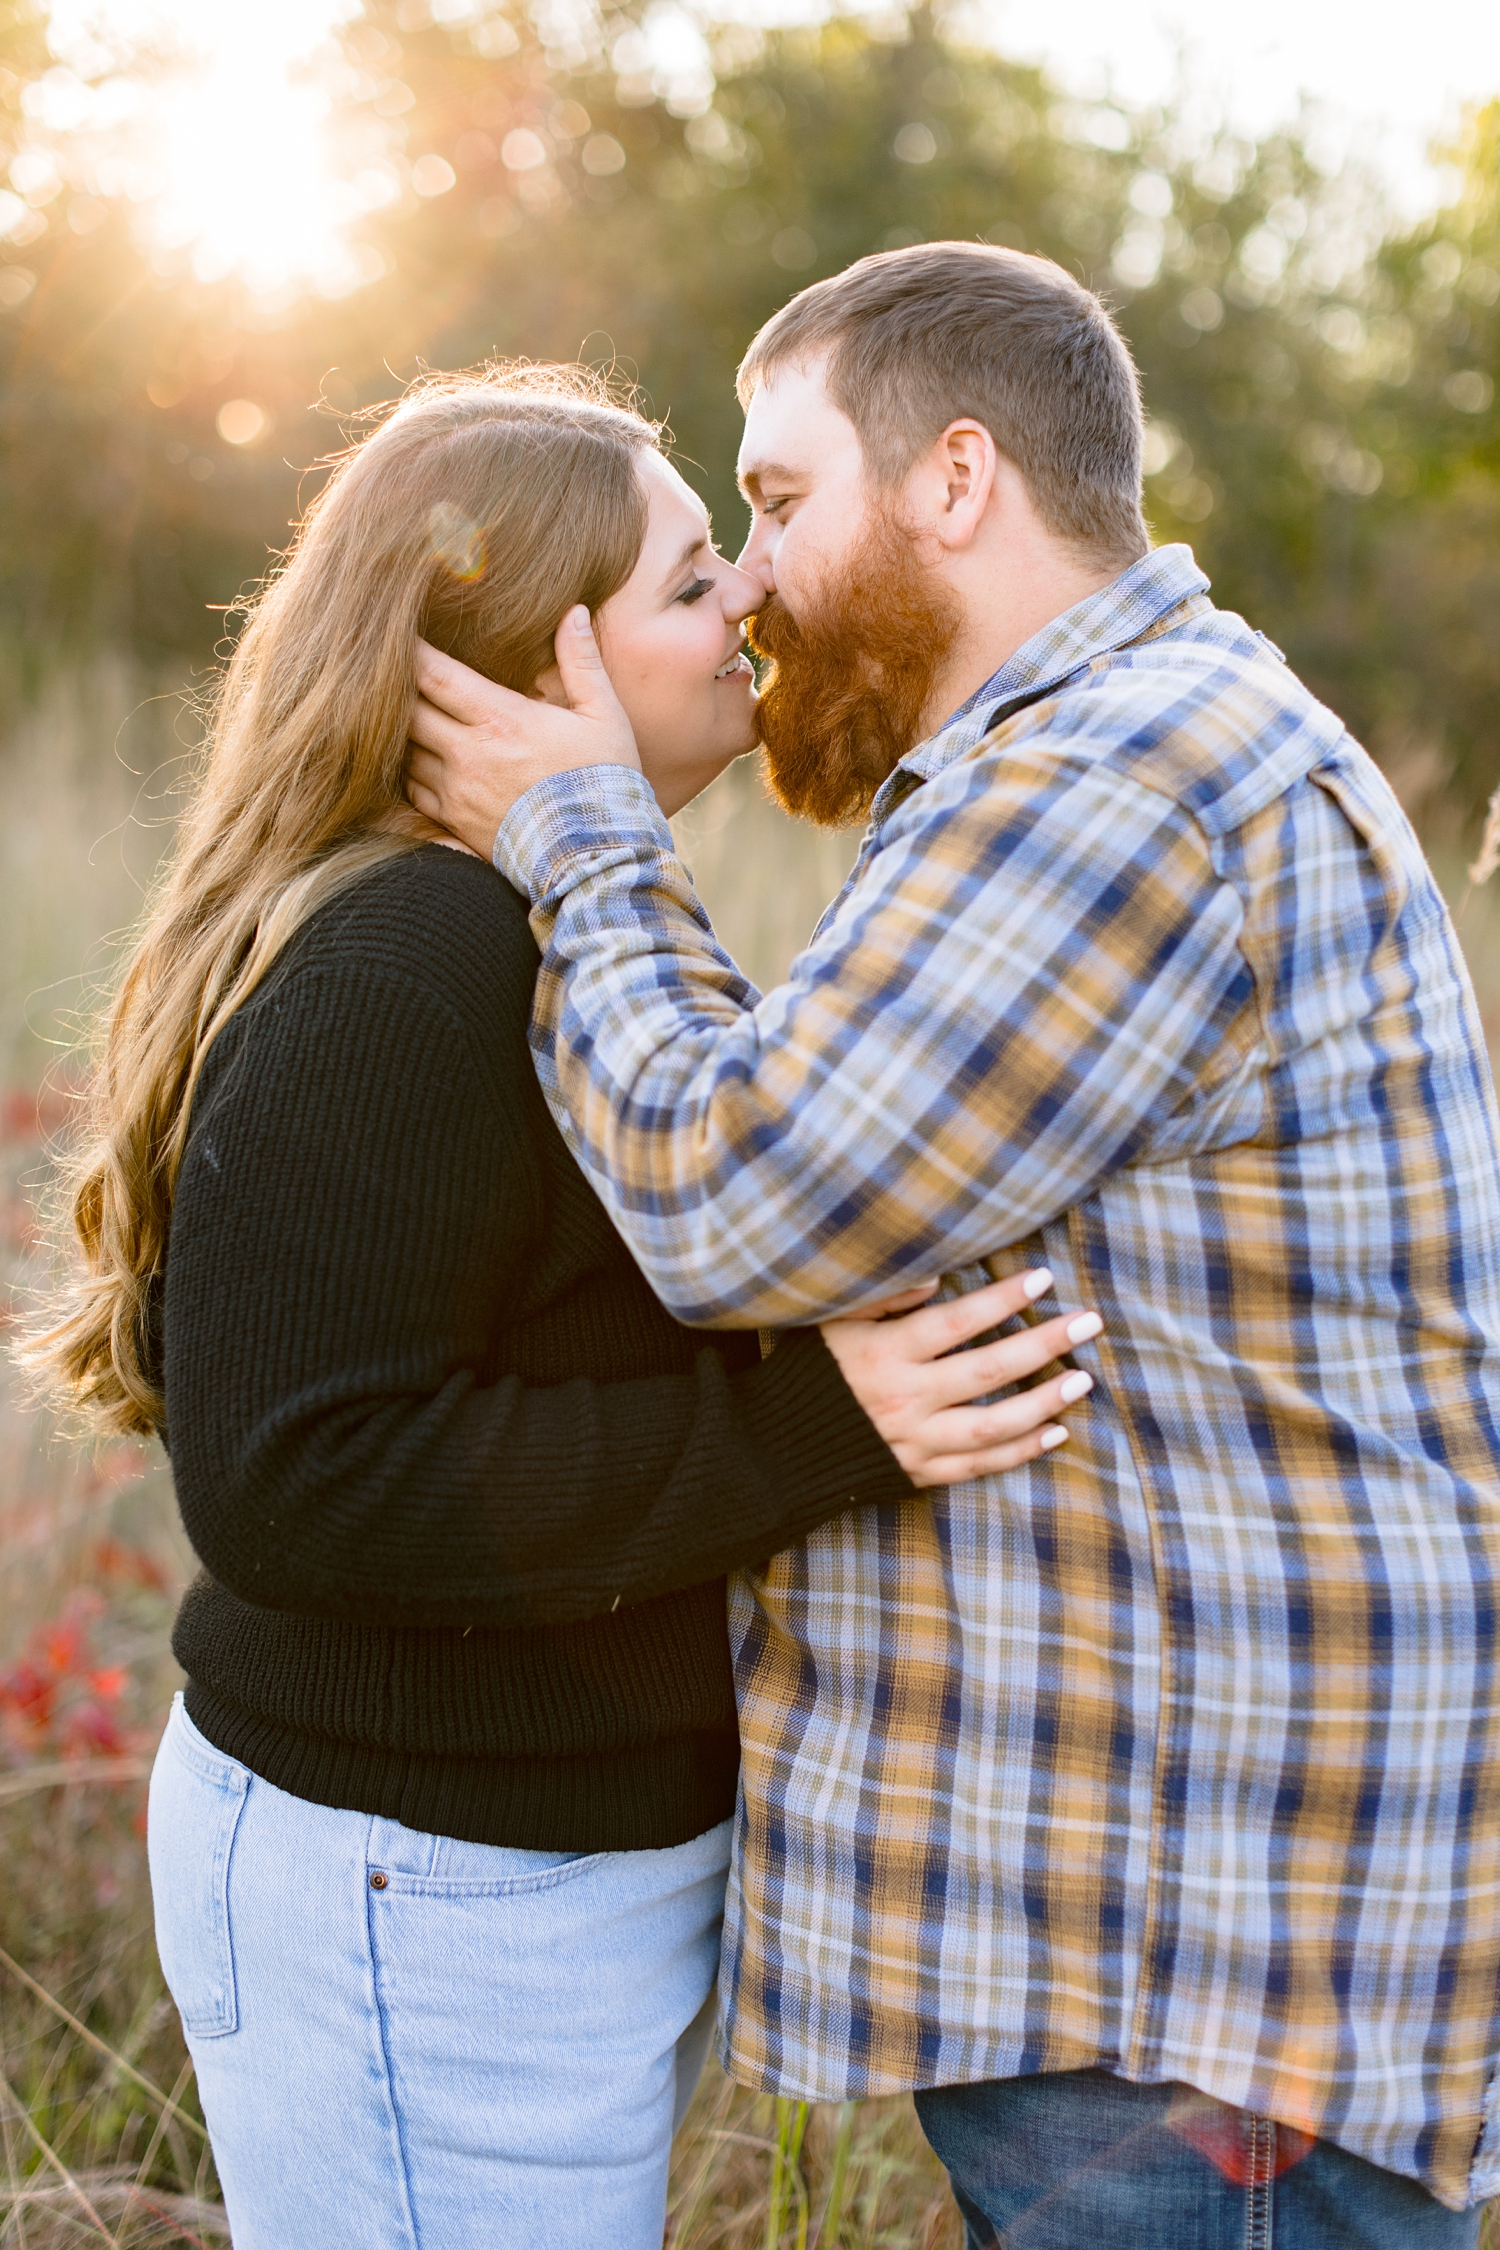 Trent slowly kisses his bride-to-be during golden hour surrounded by fall foliage at Sheldon Park in Humboldt, IA | CB Studio